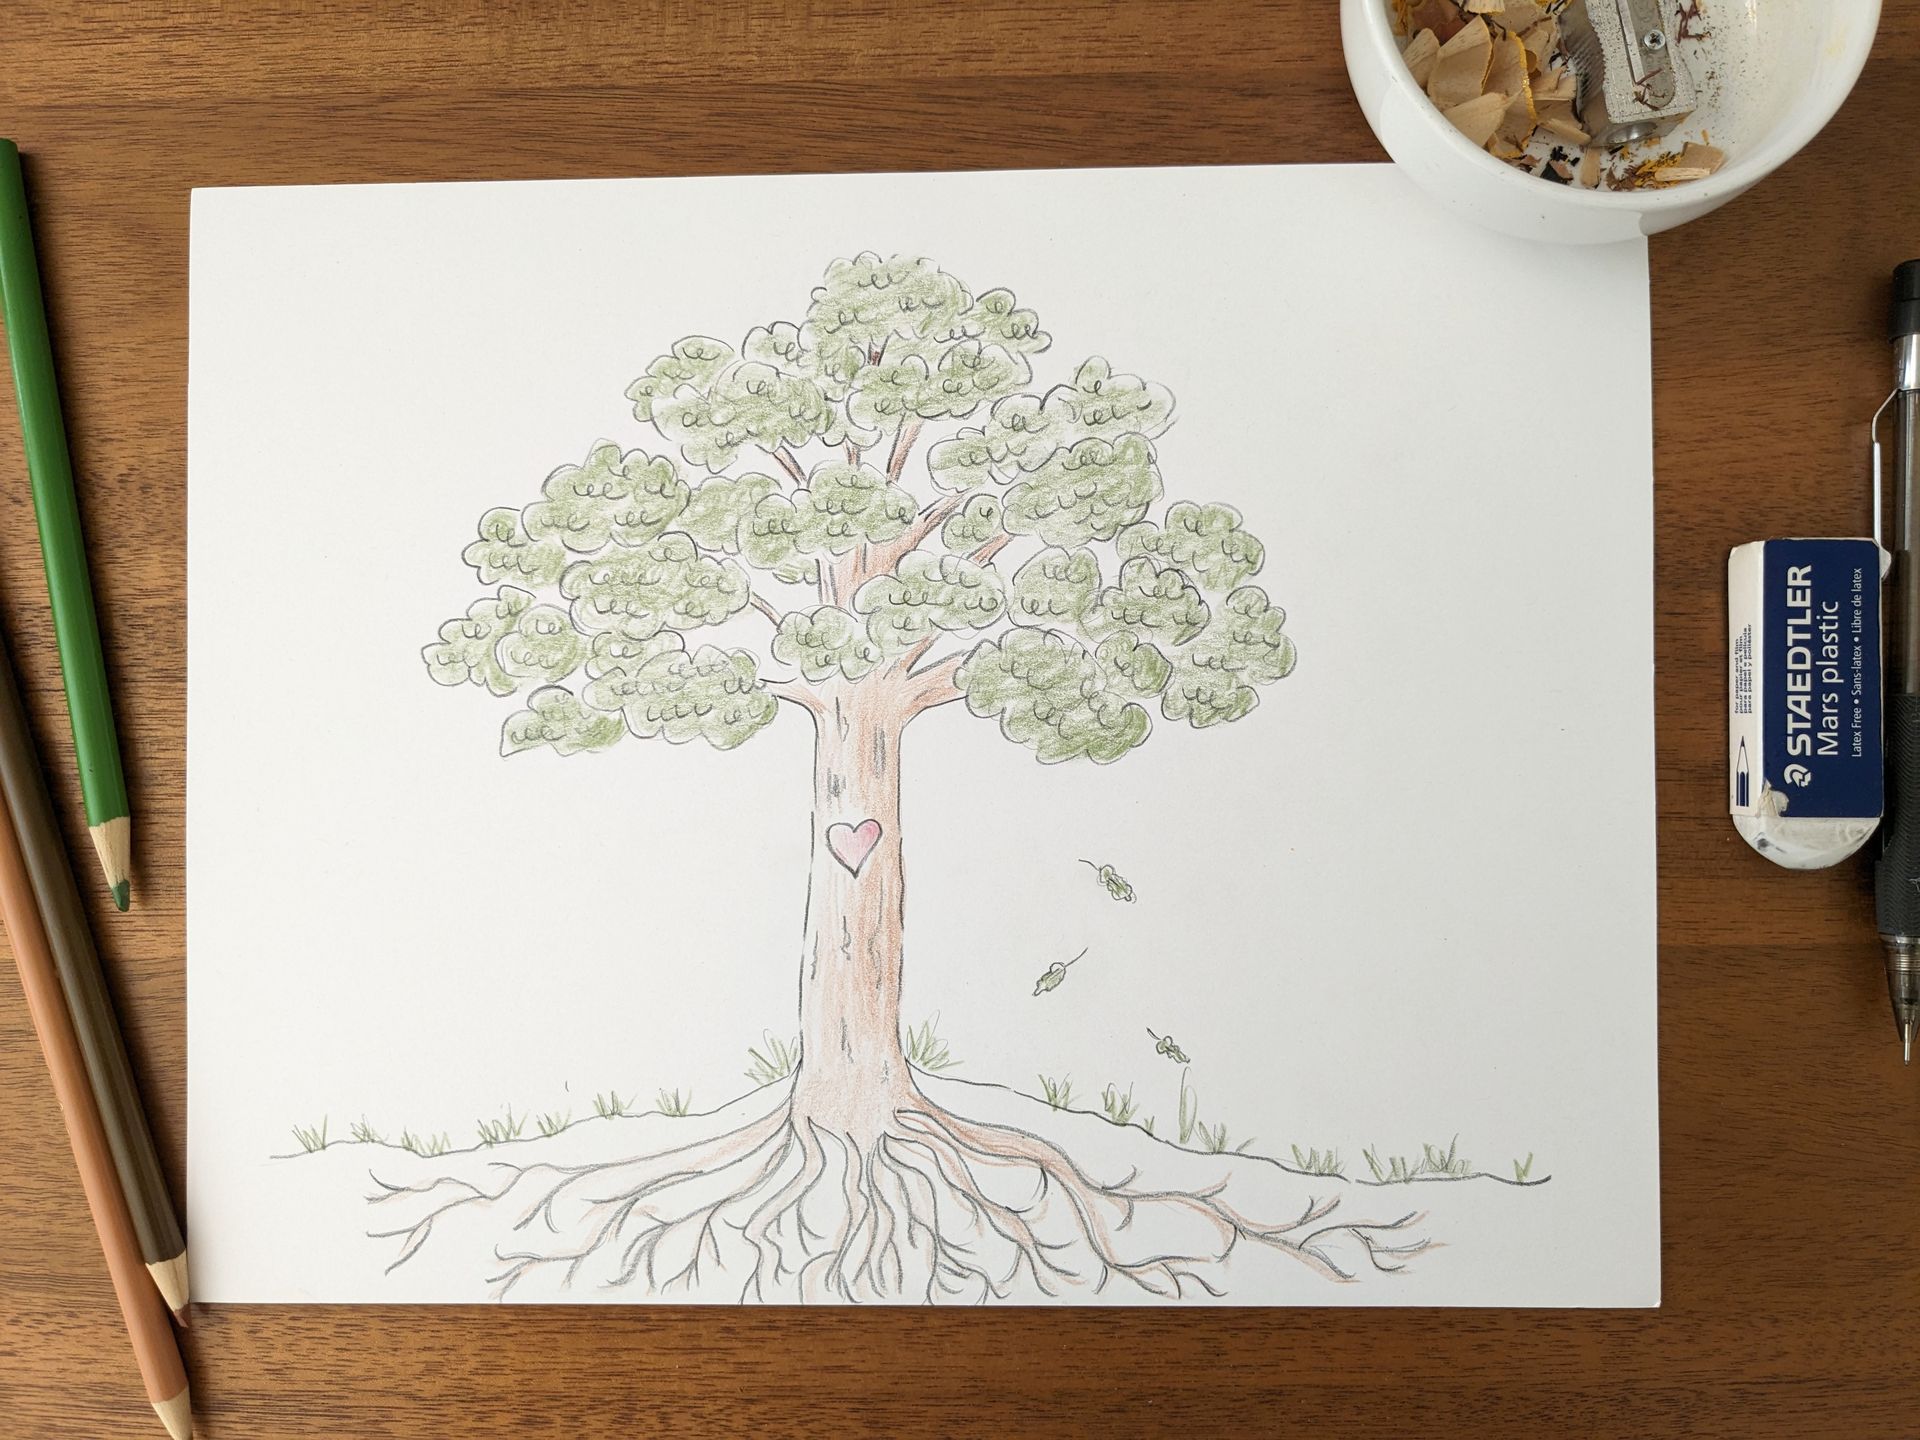 Amy's illustration of an Oak tree with a heart drawn on its trunk showing its roots under the ground. The sketch is on her wooden desk with colored pencils, shavings, and an eraser in view.